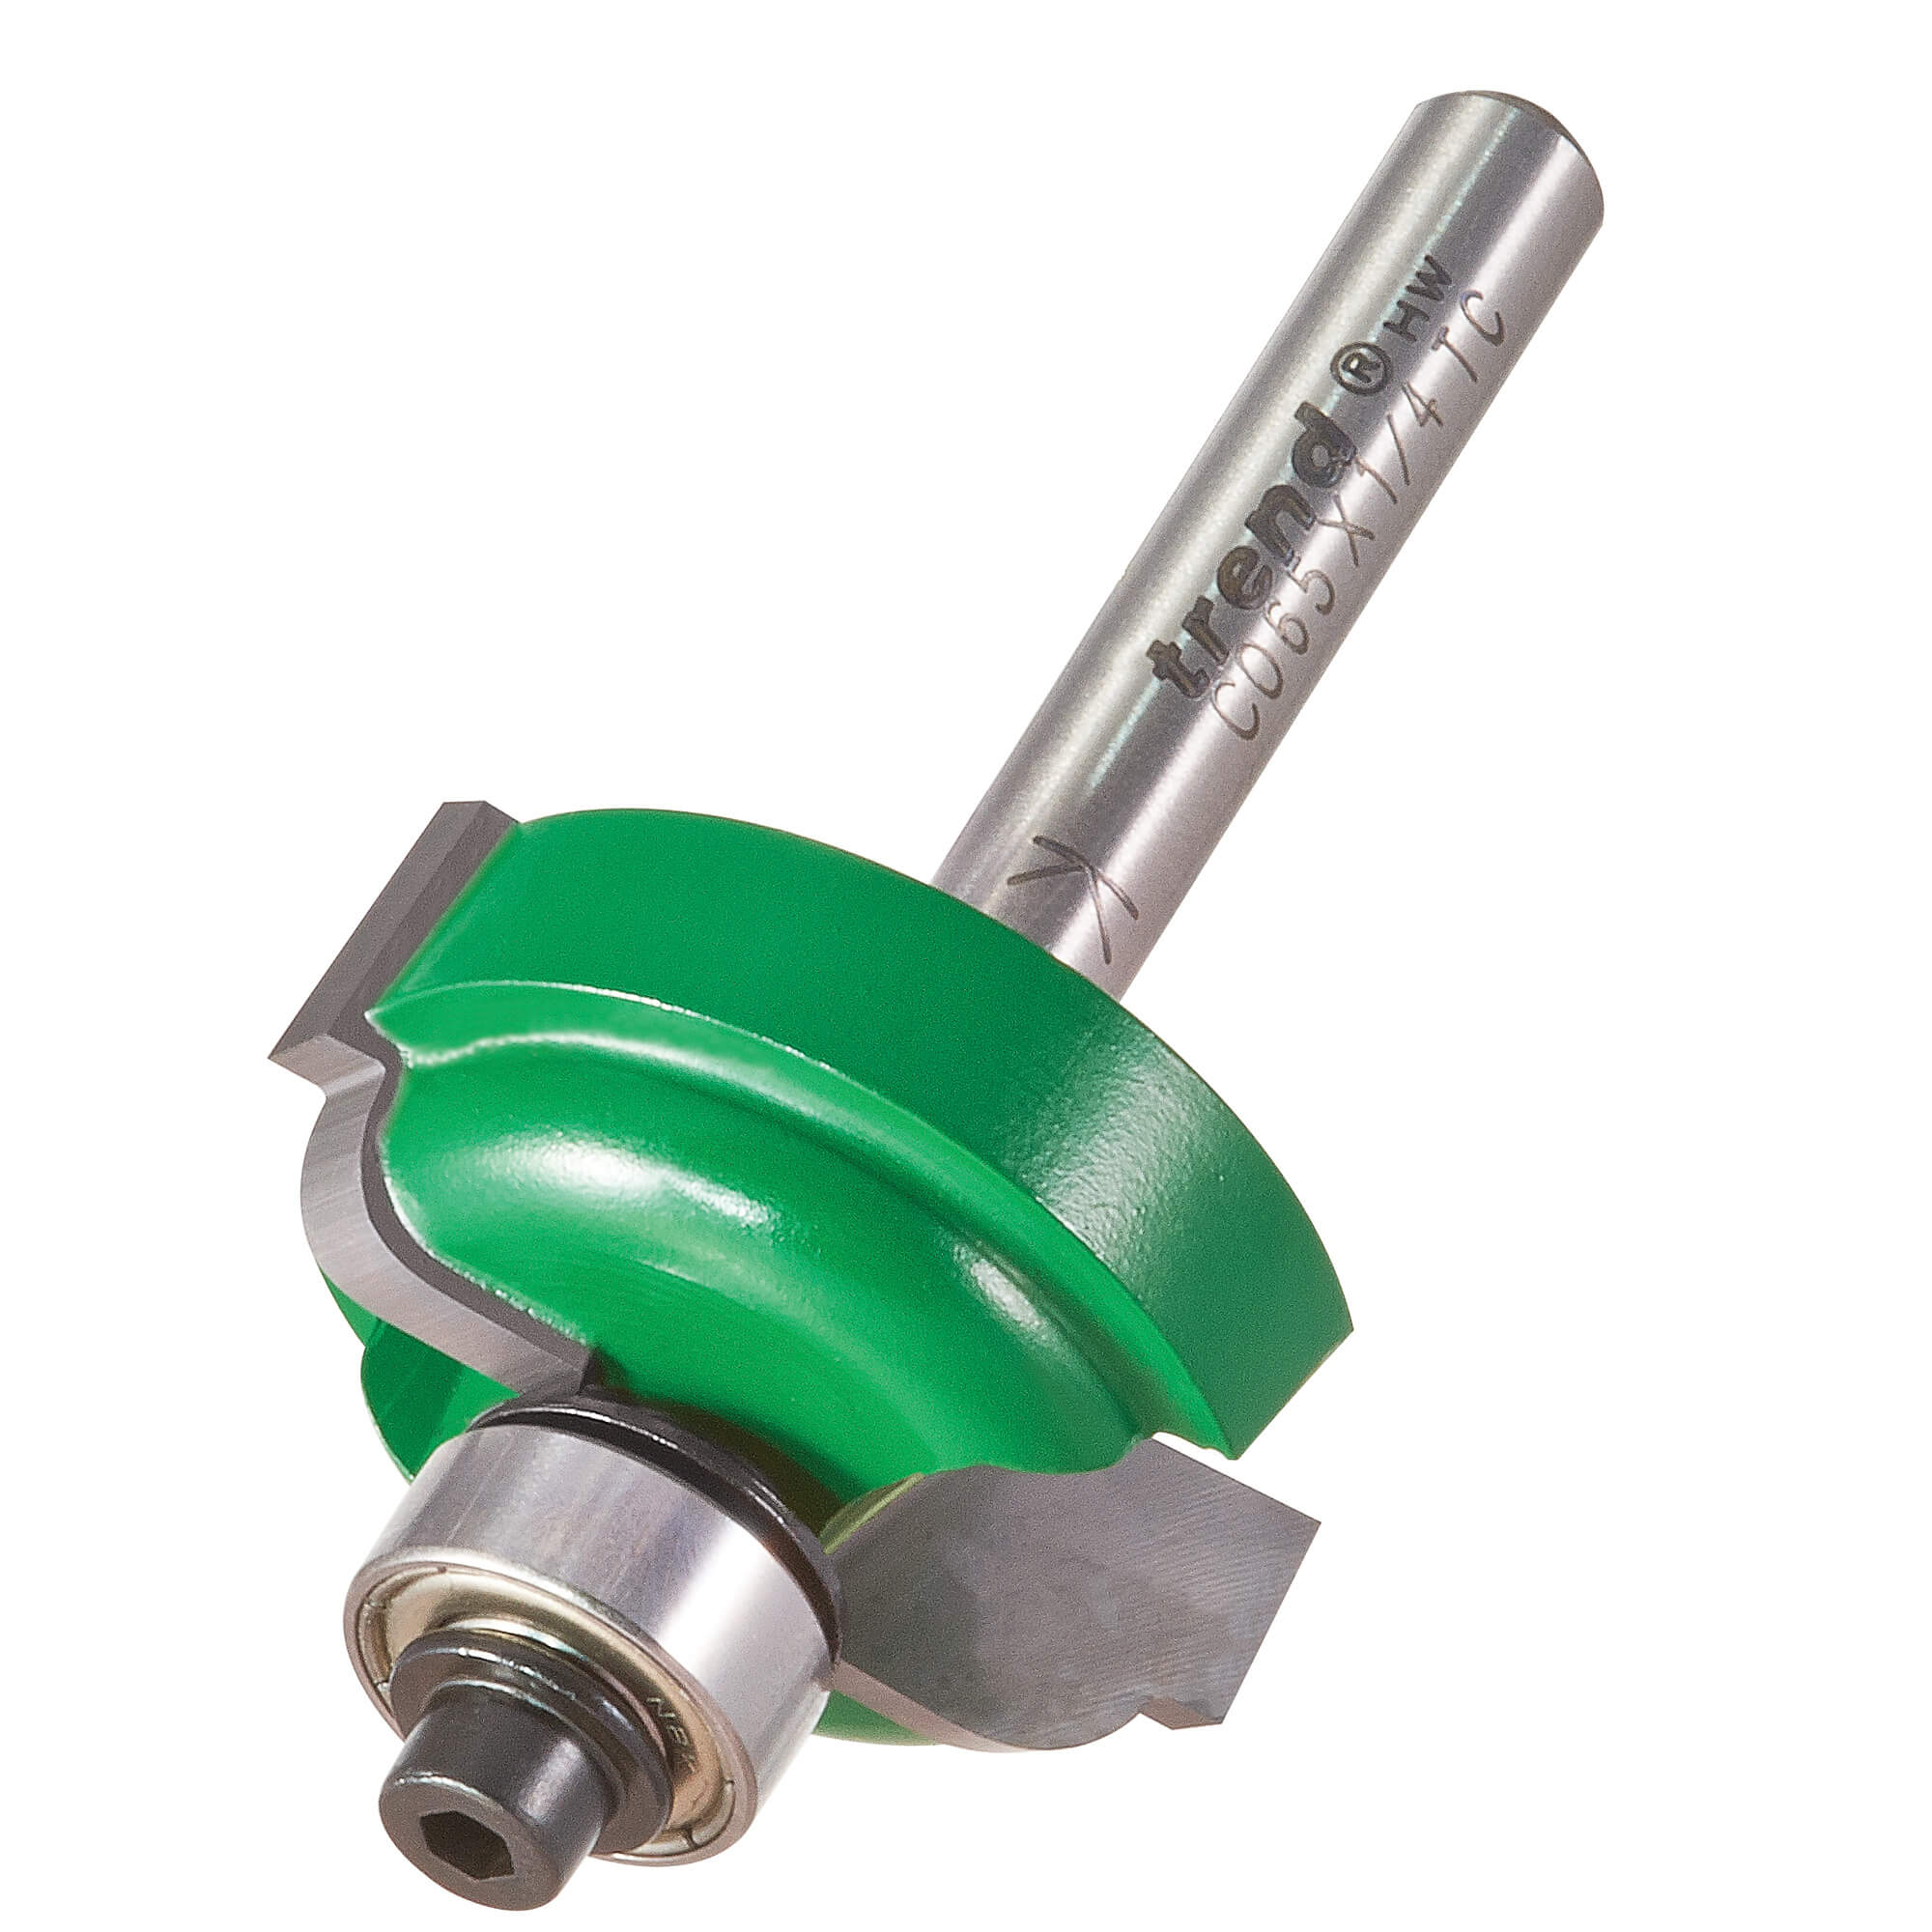 Image of Trend CRAFTPRO Radius Bearing Guided Router Cutter 31mm 12.7mm 1/4"